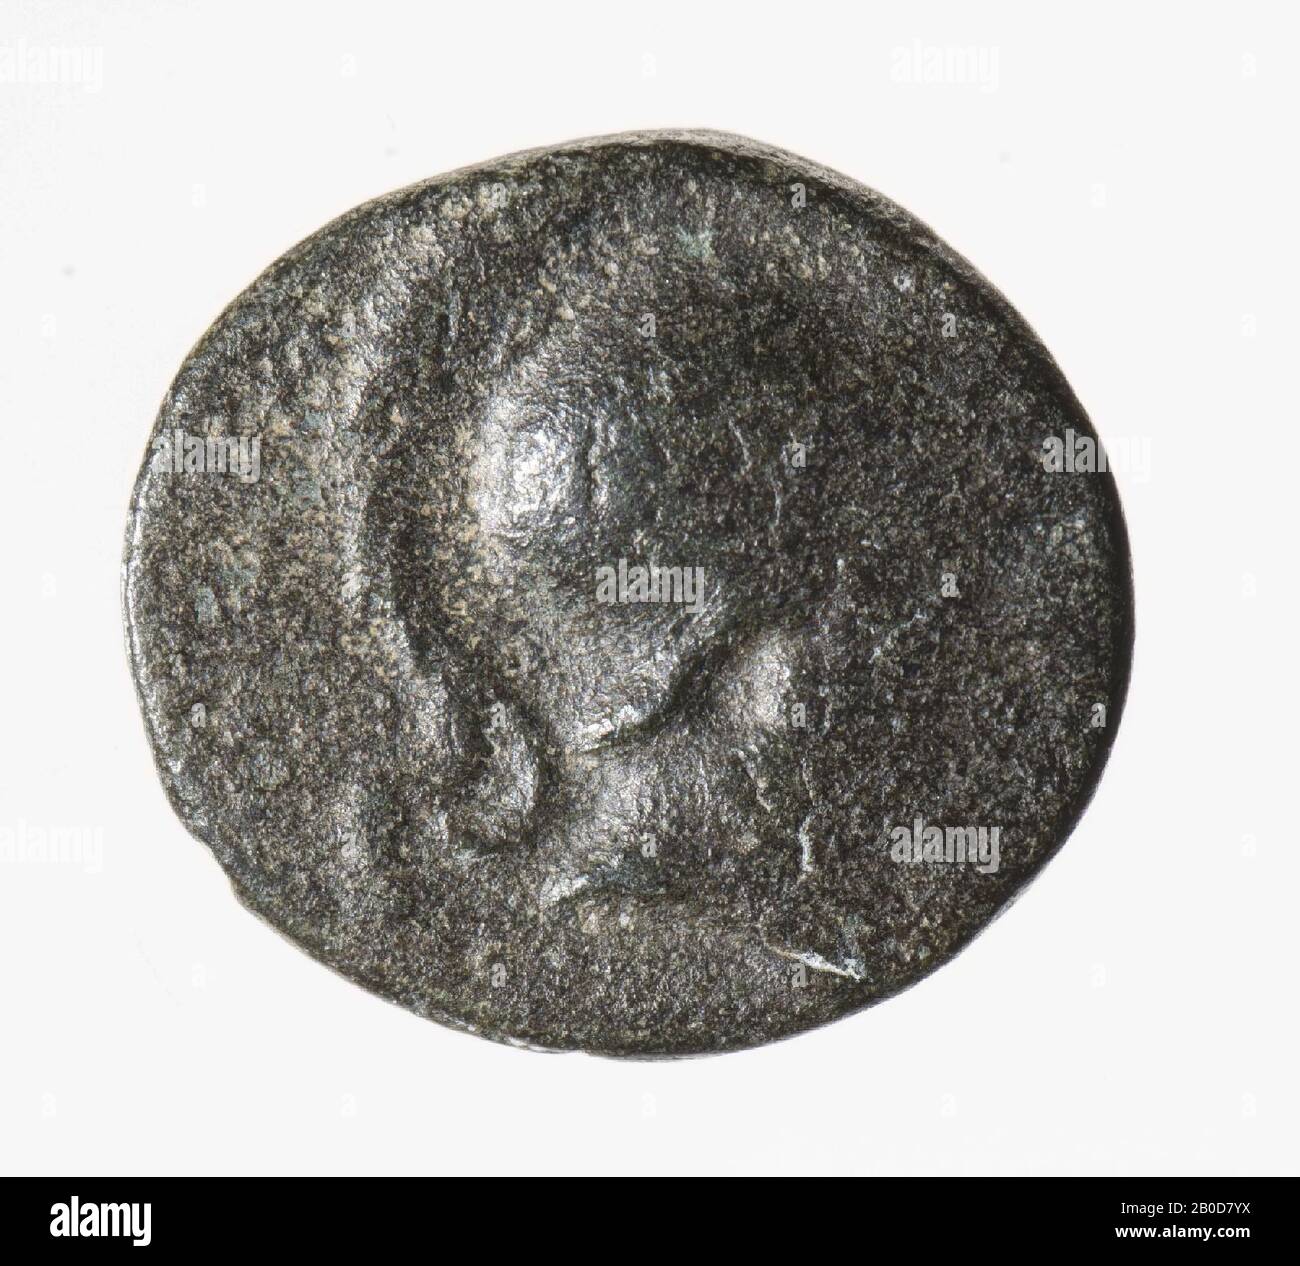 Obverse: Bust of Athena, right, with crested helmet. Worn out. Reverse: Apollo, standing, arrow in left hand and with right resting on arch. Worn, remains of Greek inscription., Coin, of Seleukos I, metal, bronze, diam: 1.6 cm, wt. 2.69 grams, 312-280 BC, unknown Stock Photo